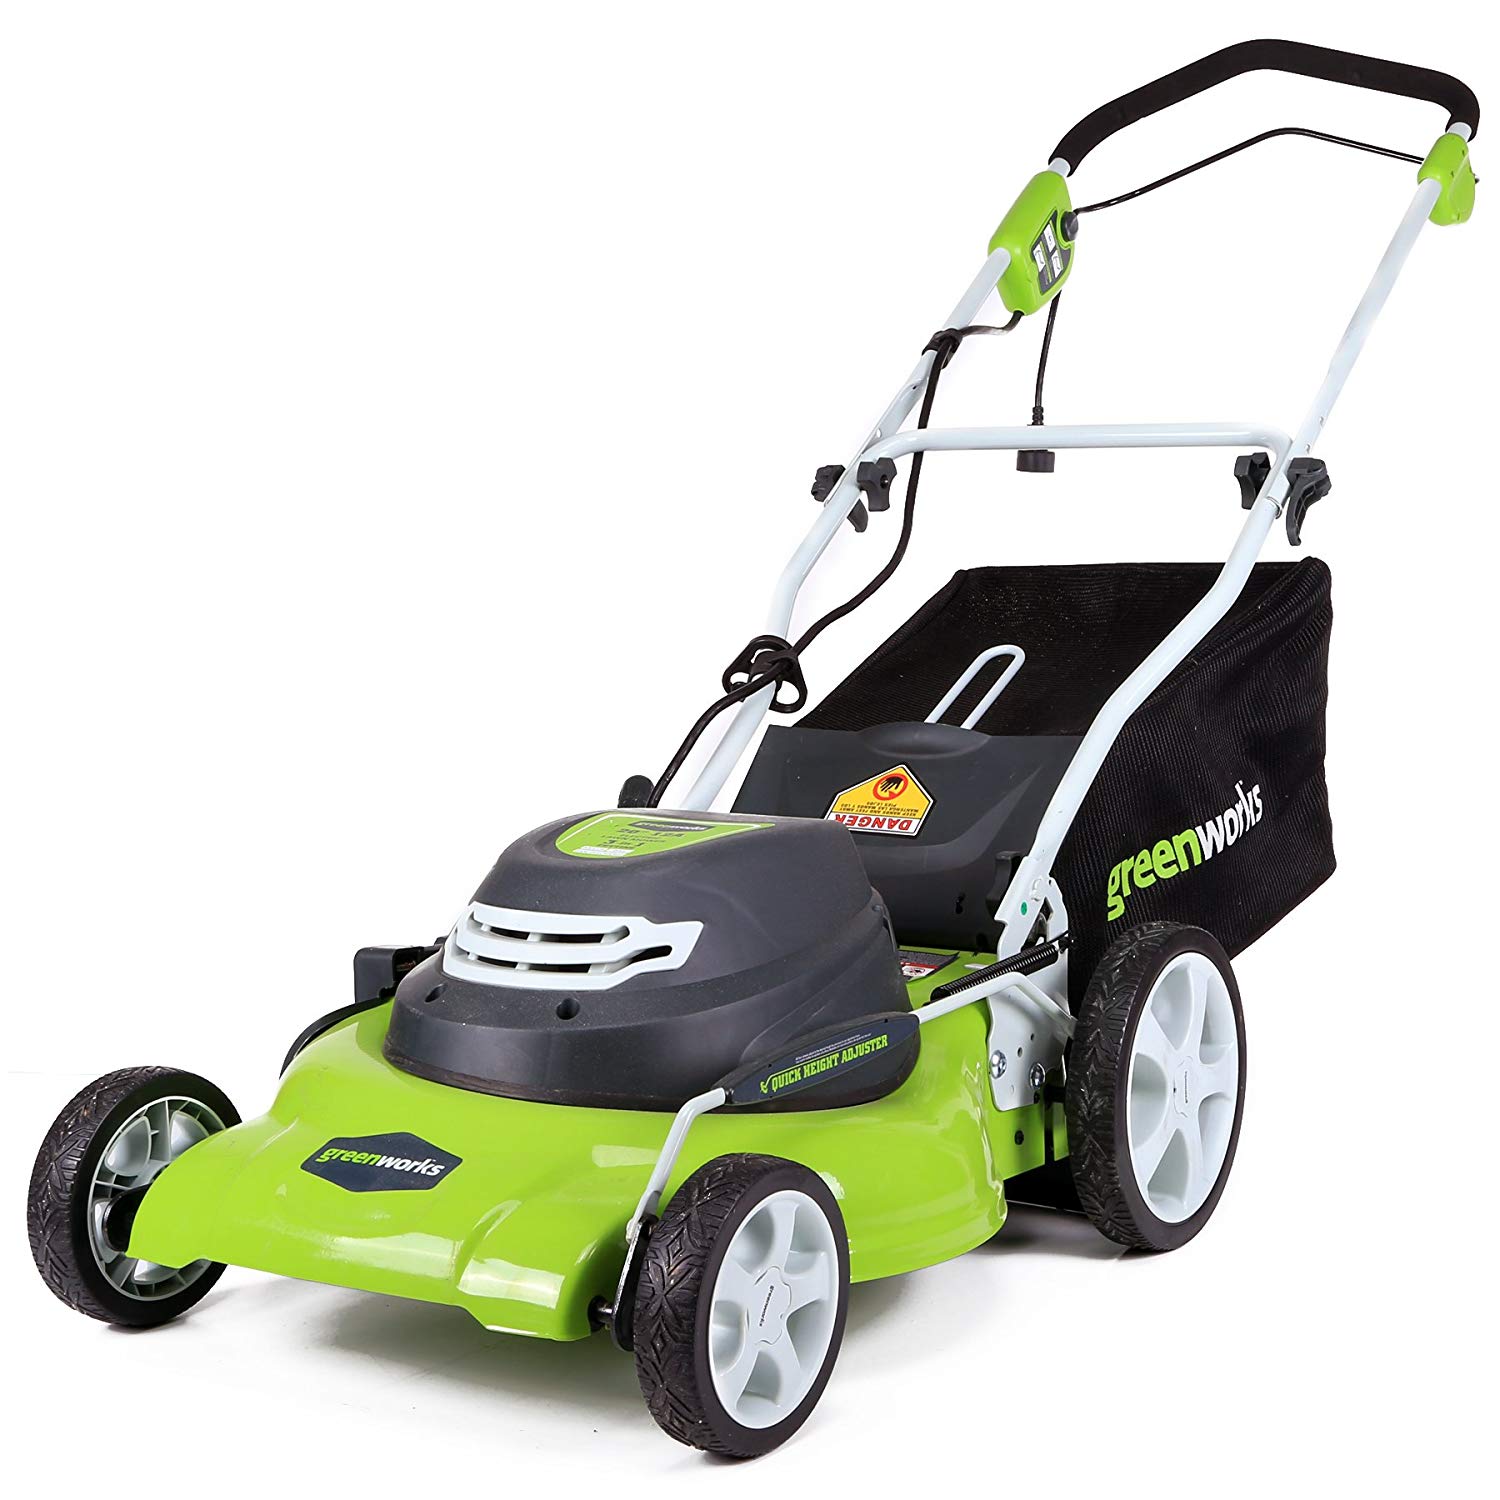 20-Inch 12 Amp Corded Lawn Mower